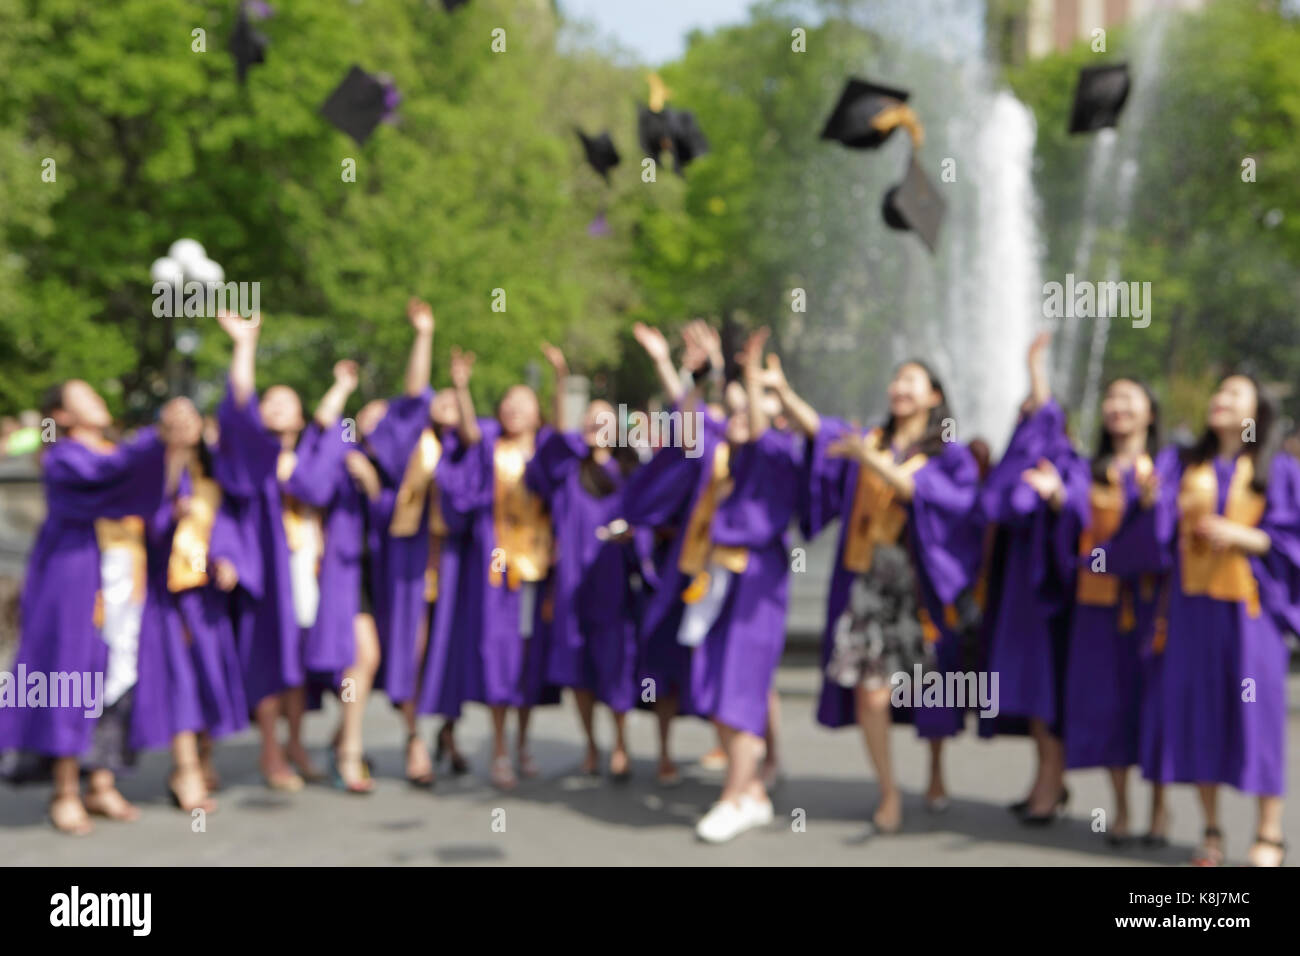 New York, NY, USA - May 16, 2017: Out of focus photo of New York University students, in caps and gowns, gathered in Washington Square Park Stock Photo